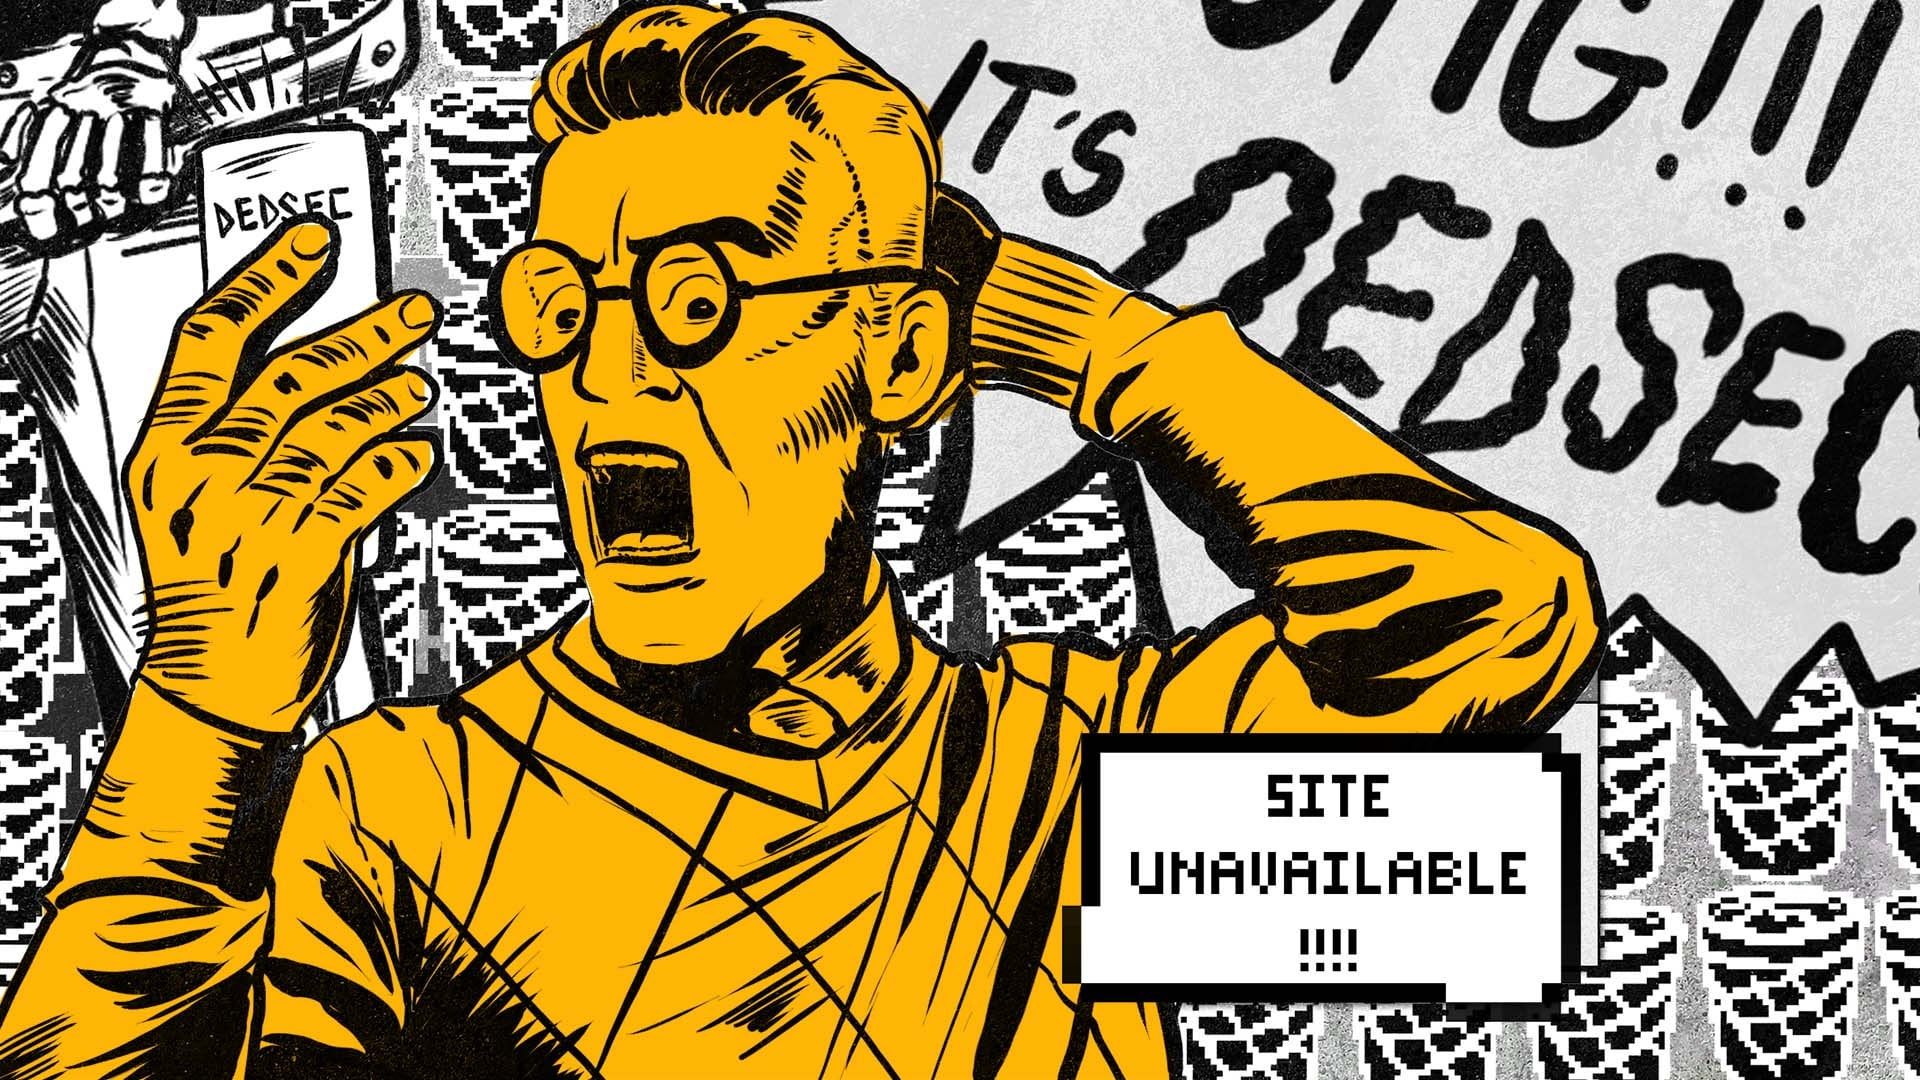 Site Unavailable illustration, Watch_Dogs, Watch_Dogs 2, DEDSEC